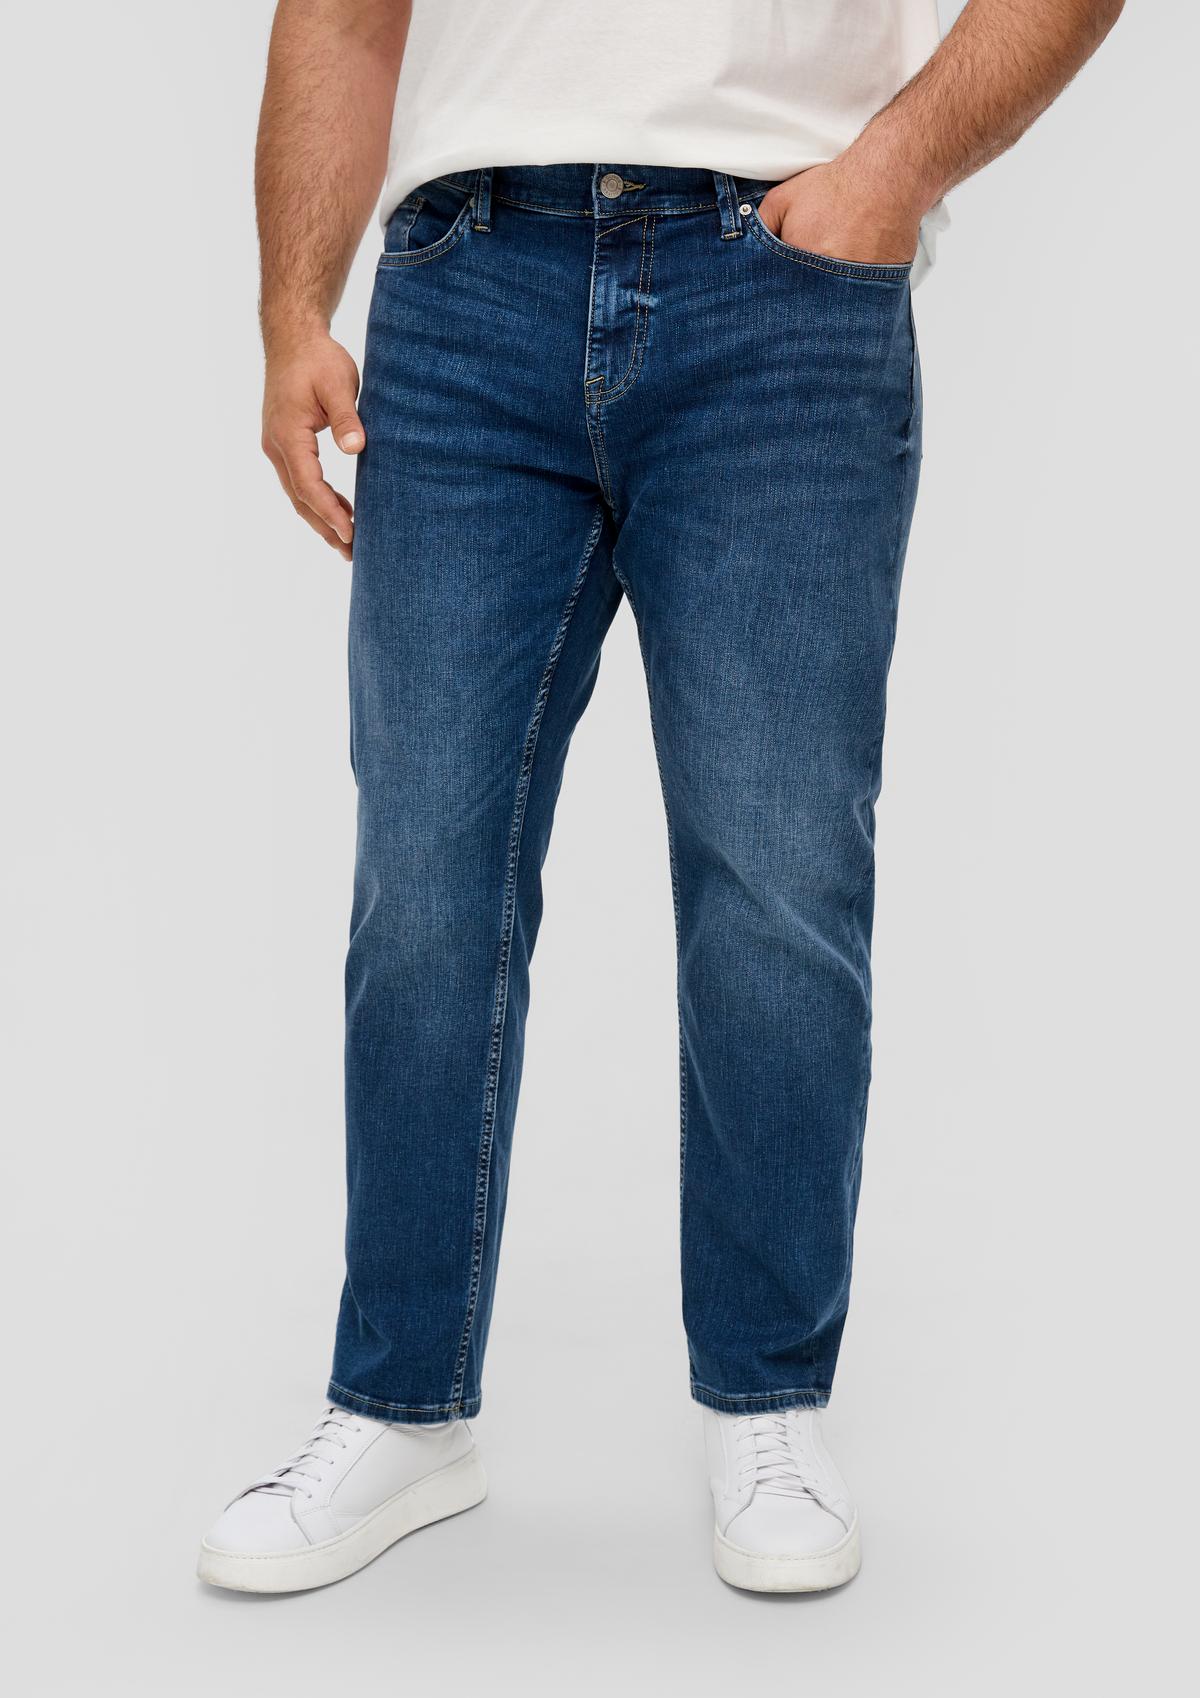 s.Oliver Jeans Casby / Relaxed Fit / High Rise / Straight Leg